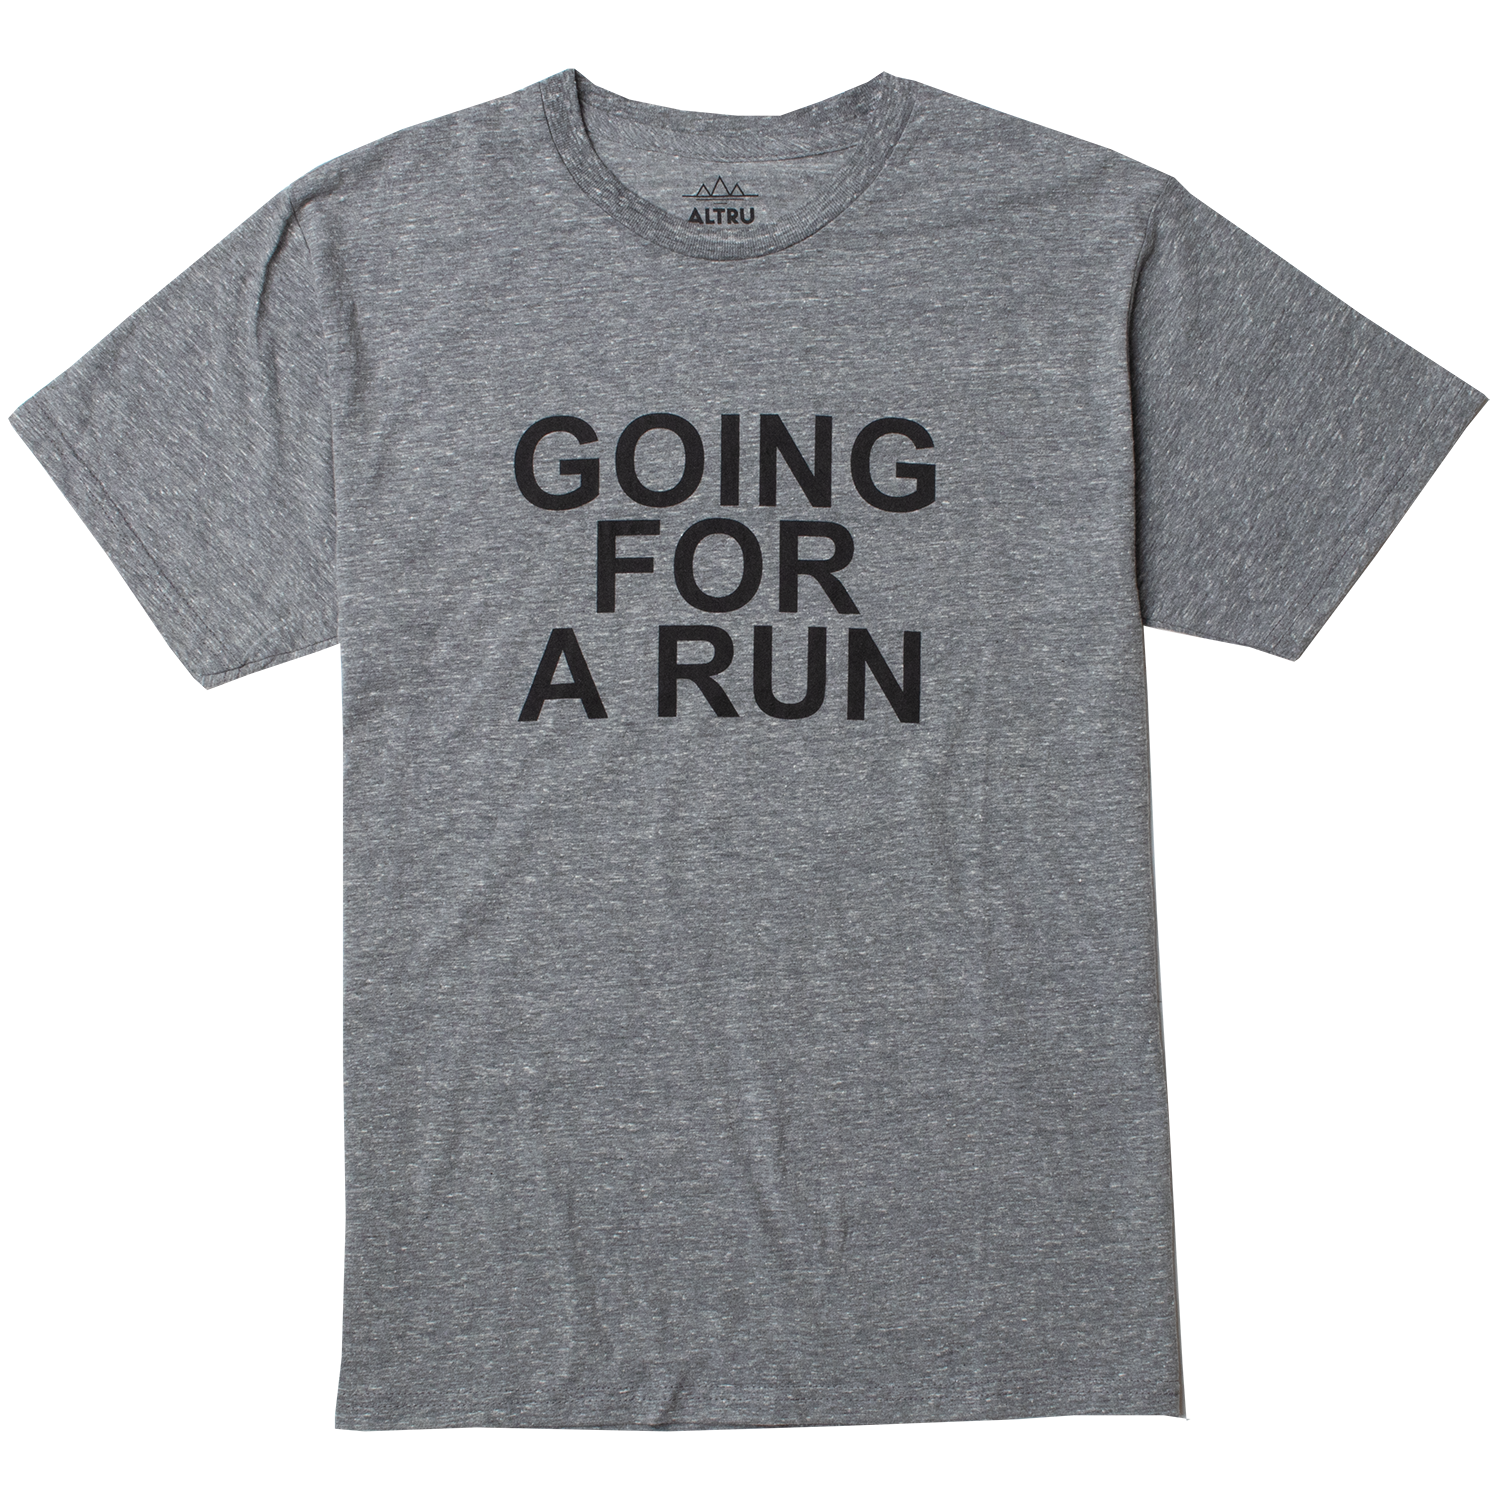 Going for a Run tee